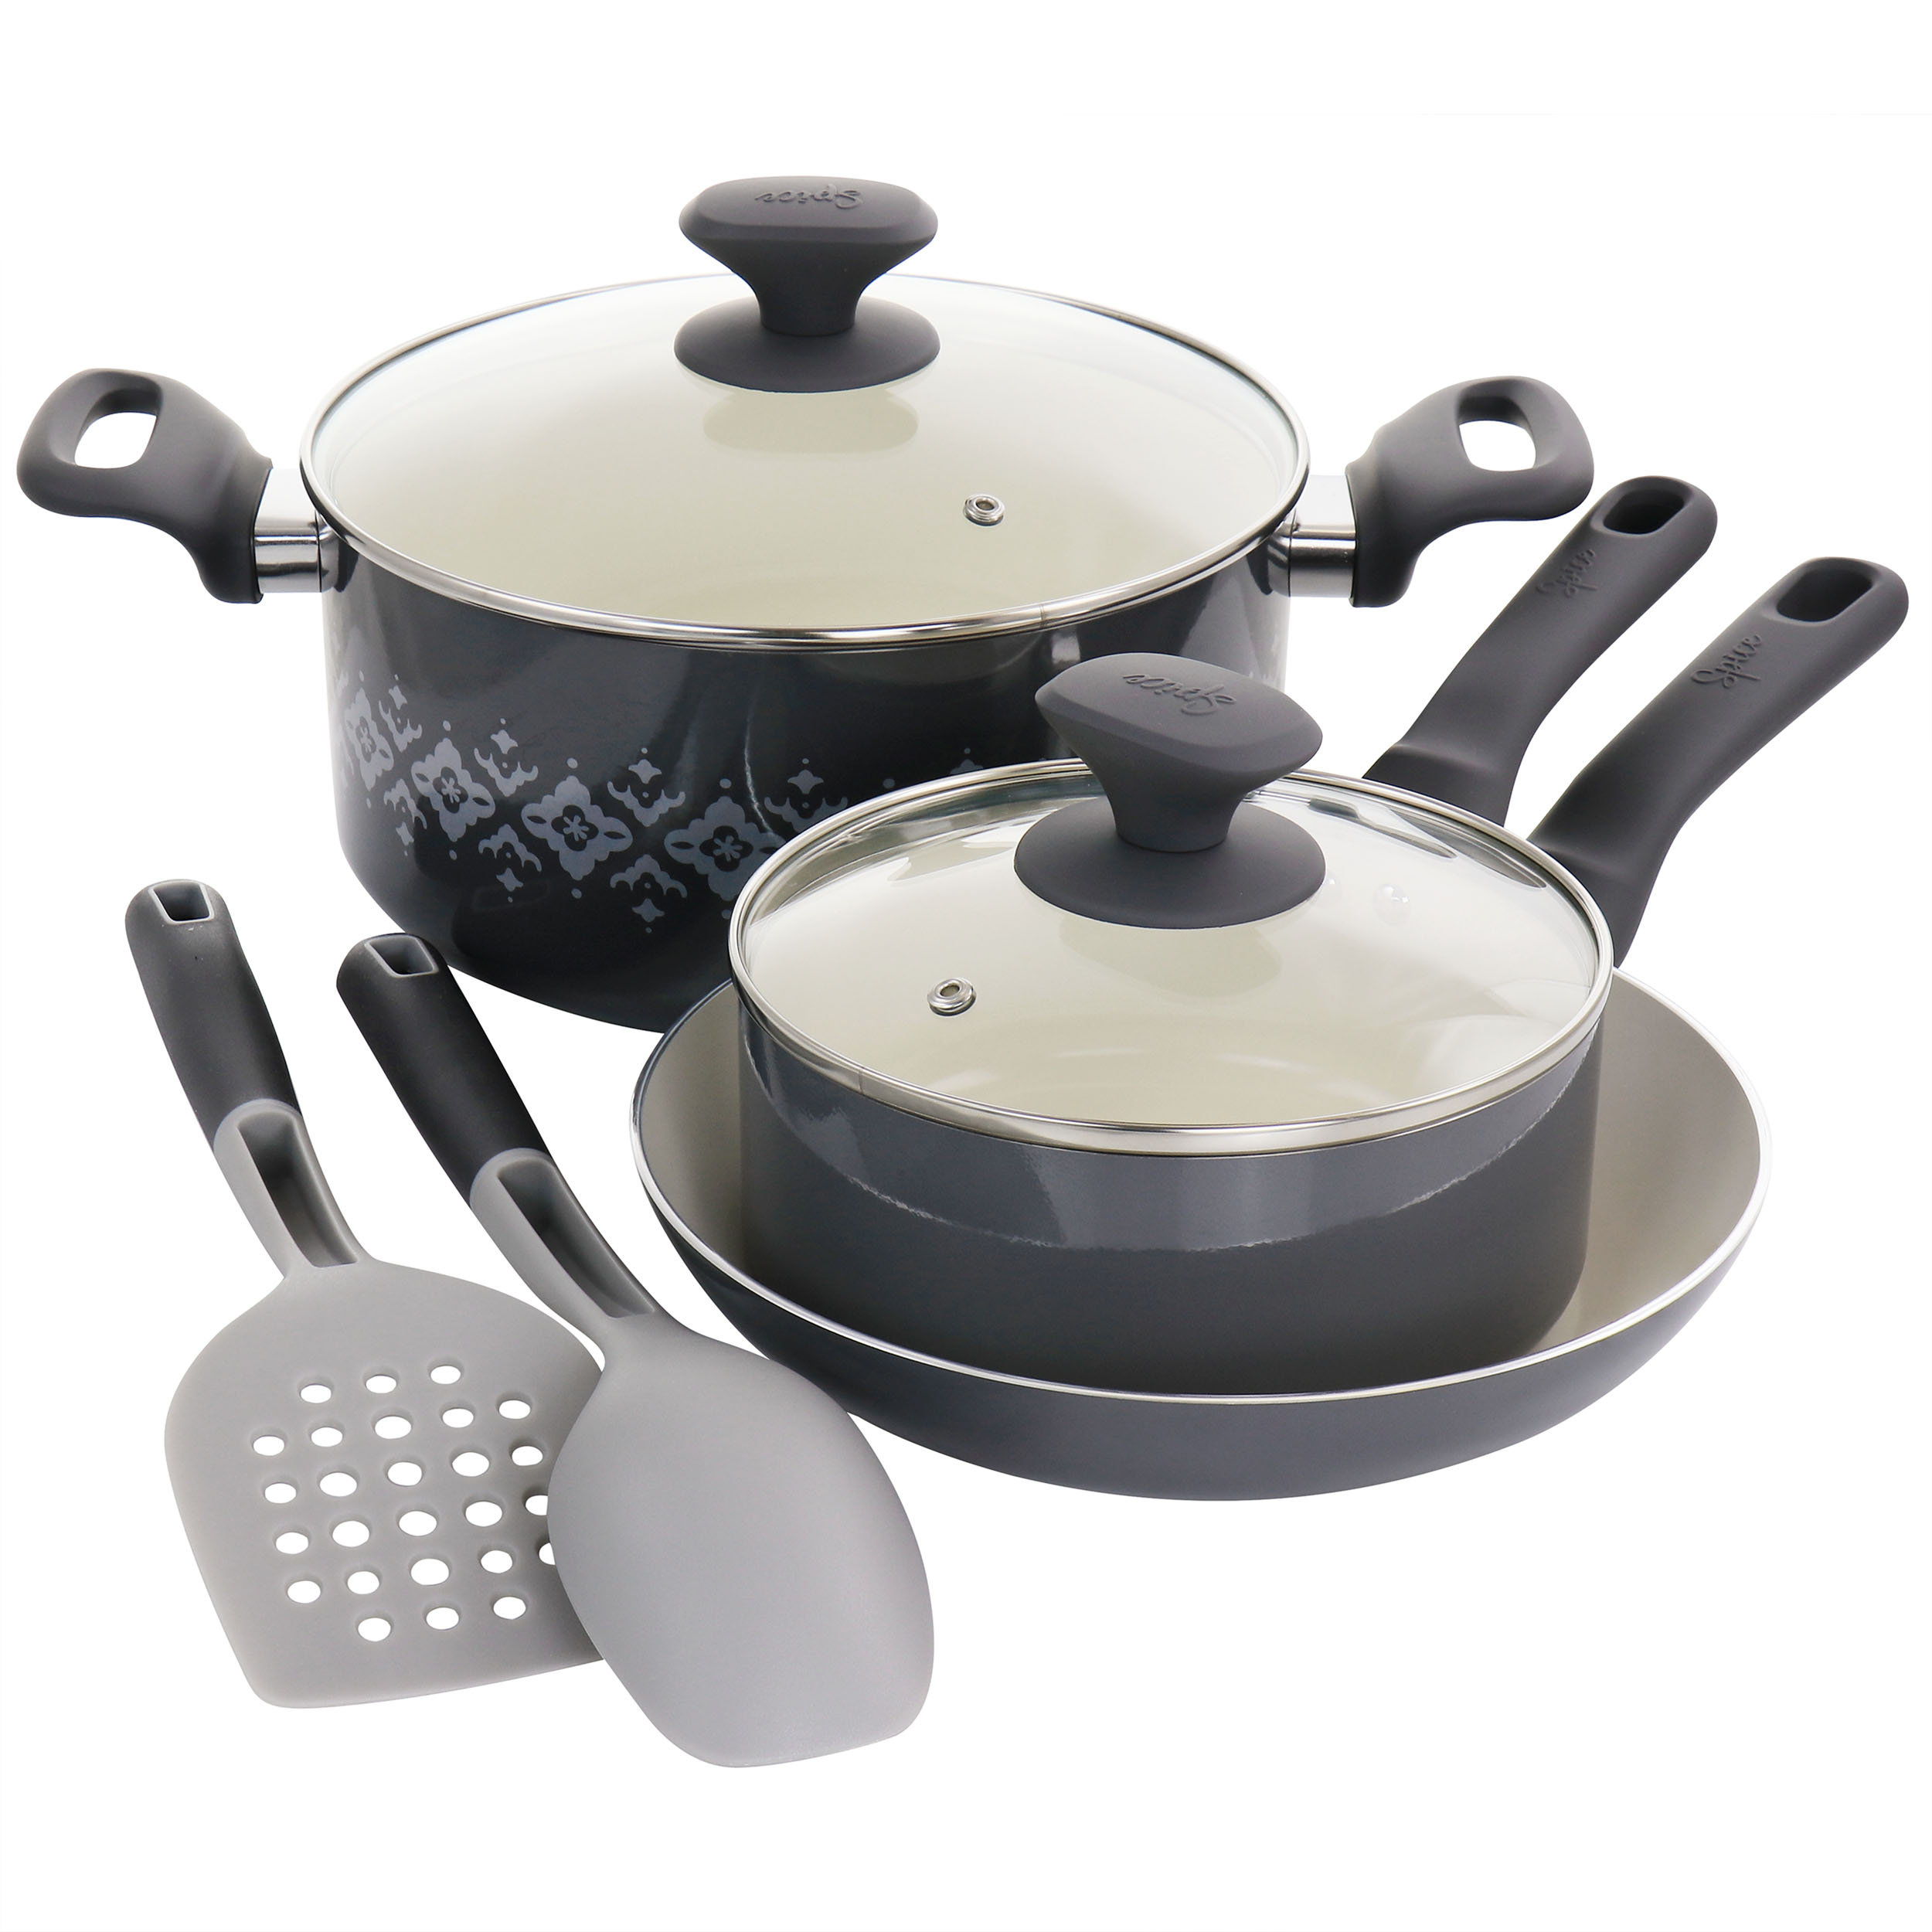 Spice by Tia Mowry 10-Piece Healthy Non-Stick Ceramic Cookware Set - Mint